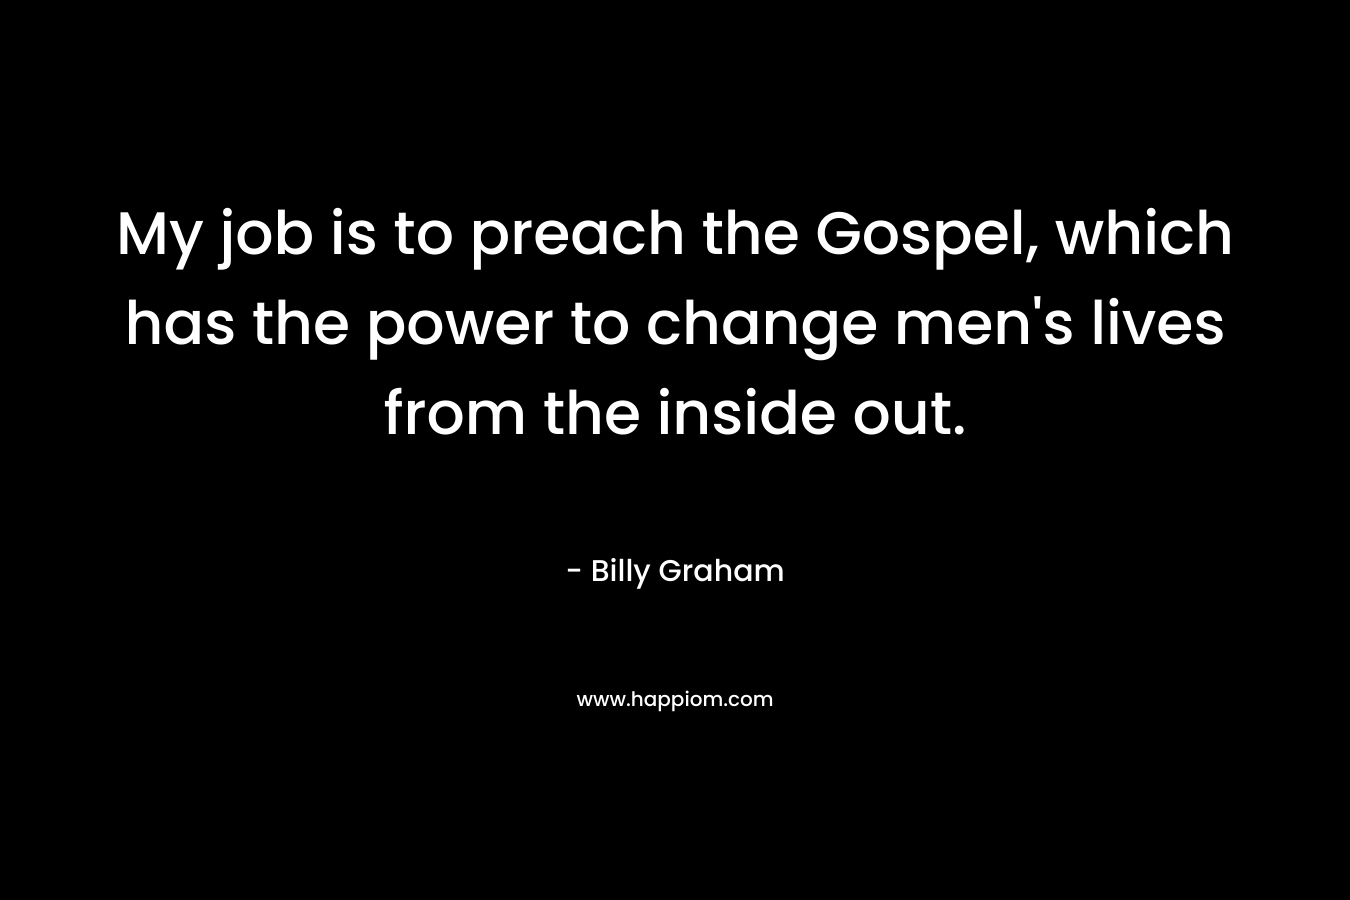 My job is to preach the Gospel, which has the power to change men's lives from the inside out.